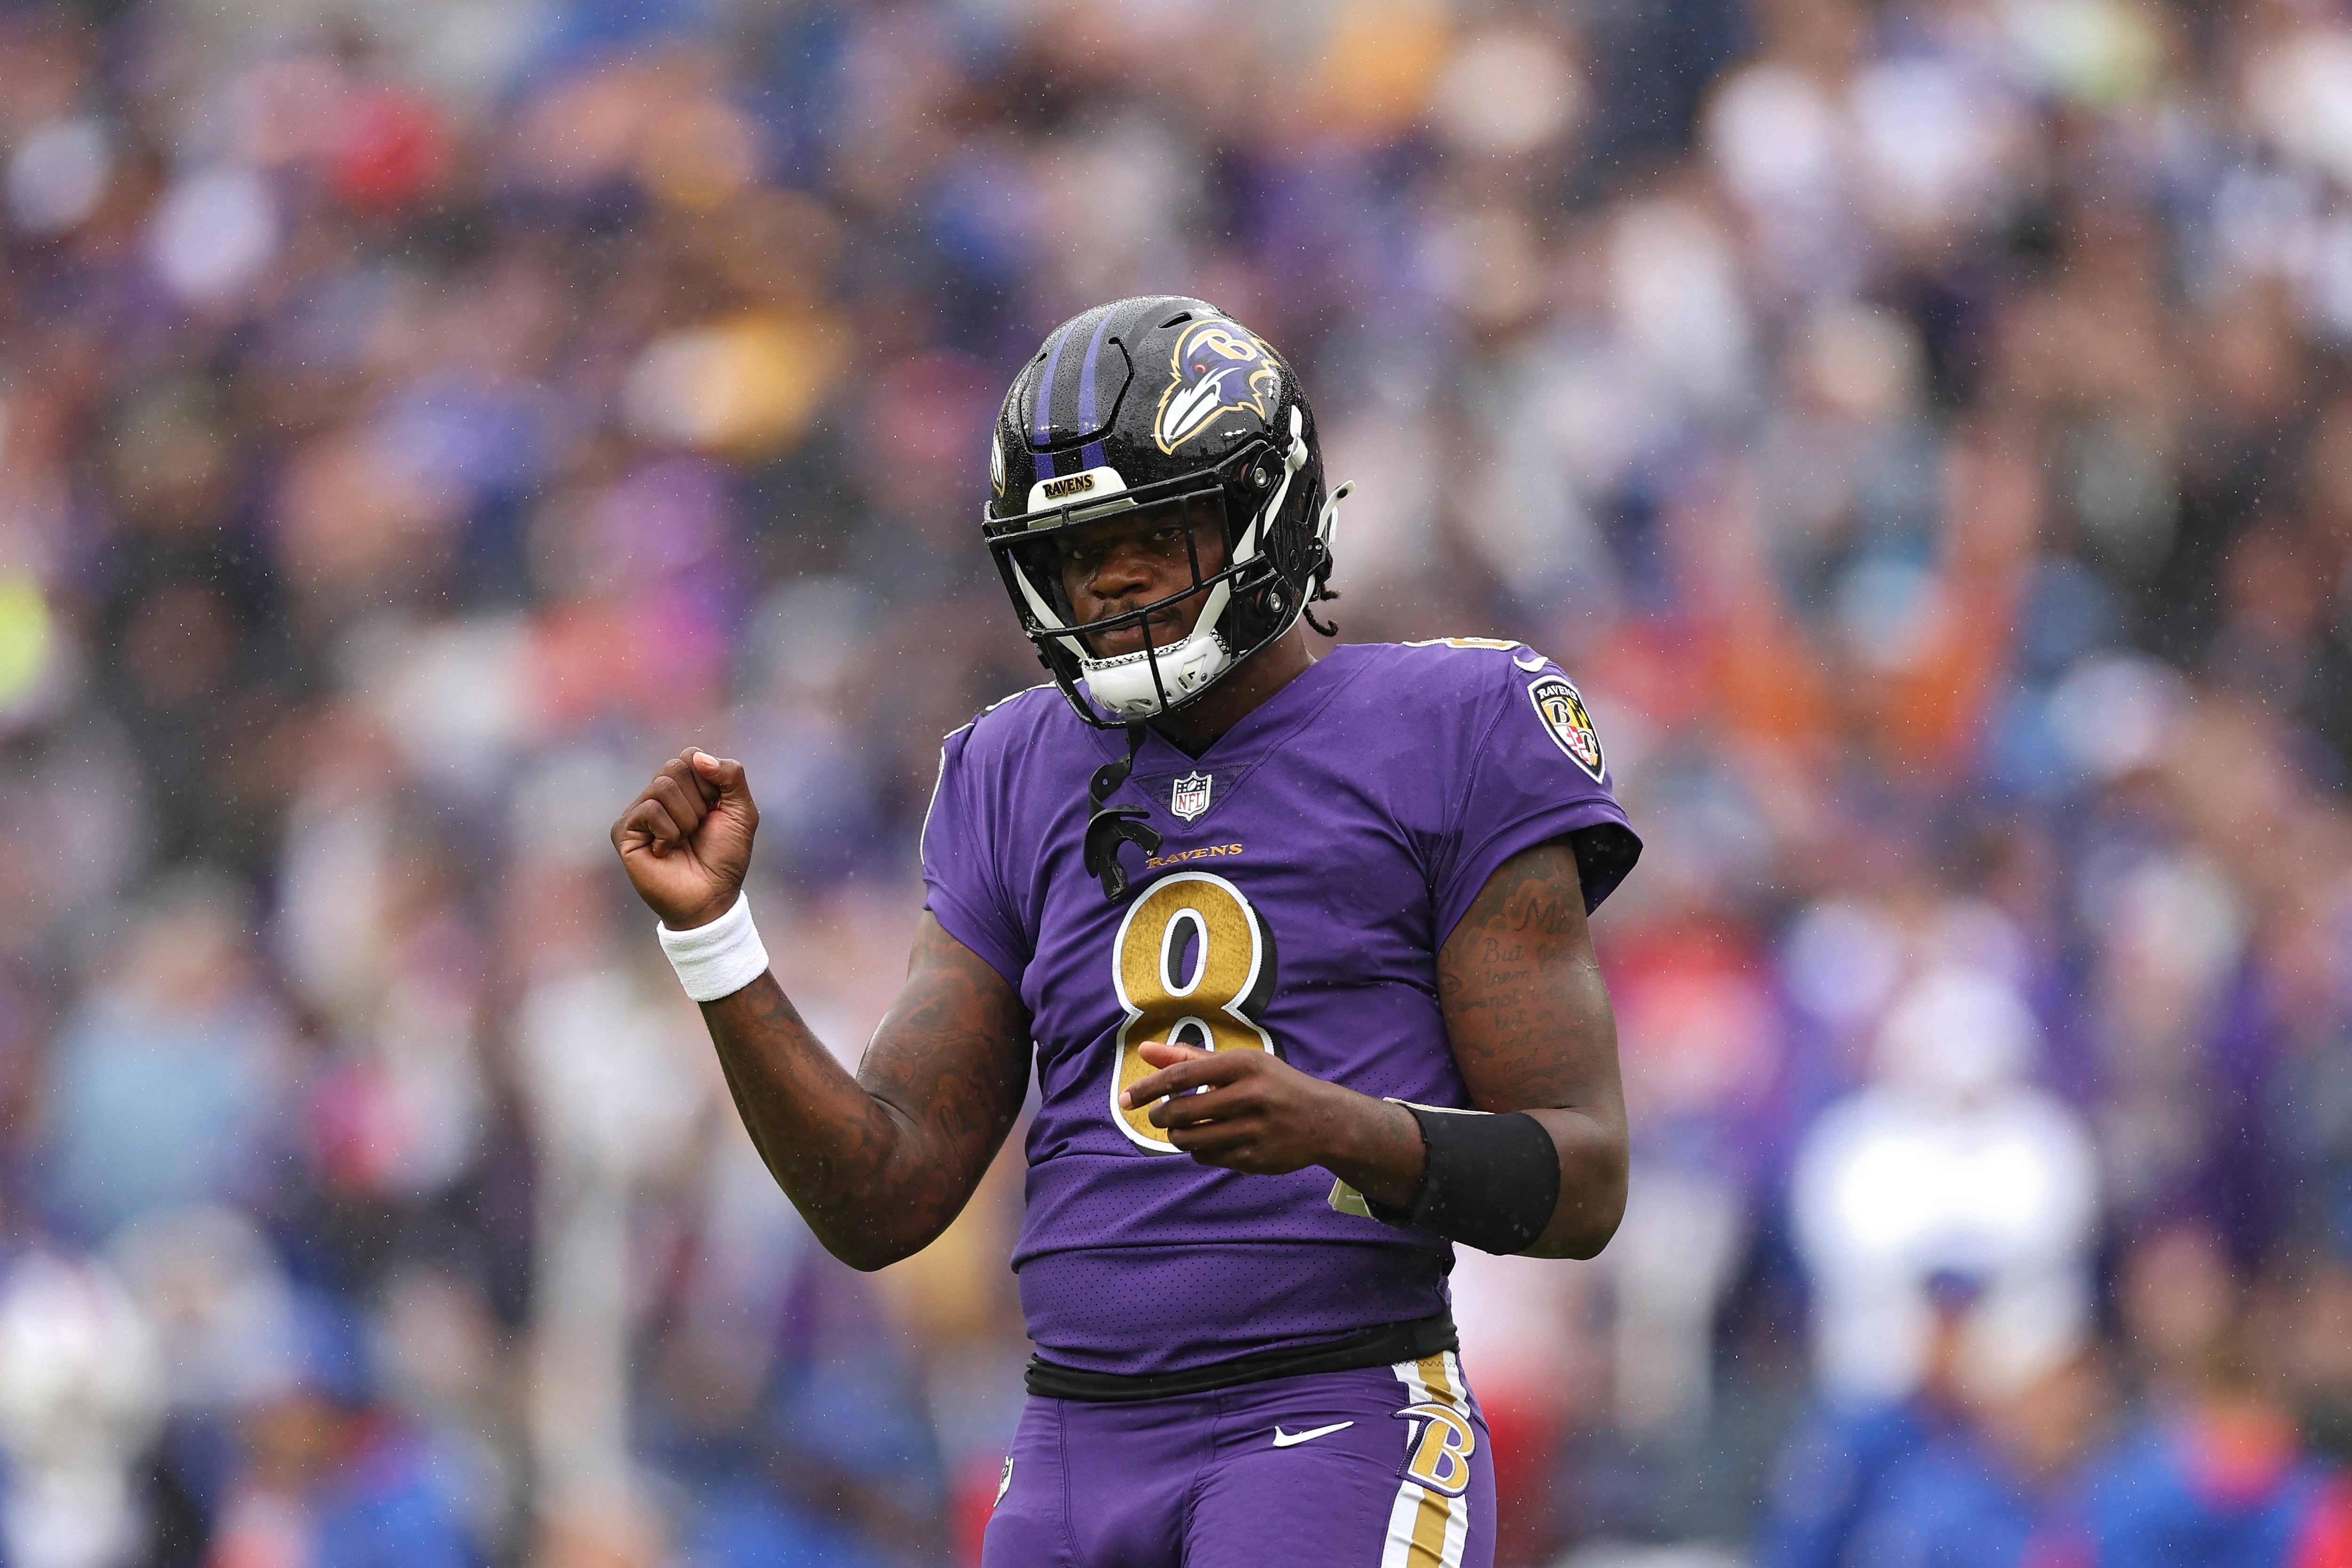 BALTIMORE, MARYLAND - OCTOBER 02: Quarterback Lamar Jackson #8 of the Baltimore Ravens celebrates after teammate J.K. Dobbins #27 scored a touchdown in the first quarter against the Buffalo Bills at M&T Bank Stadium on October 02, 2022 in Baltimore, Maryland.